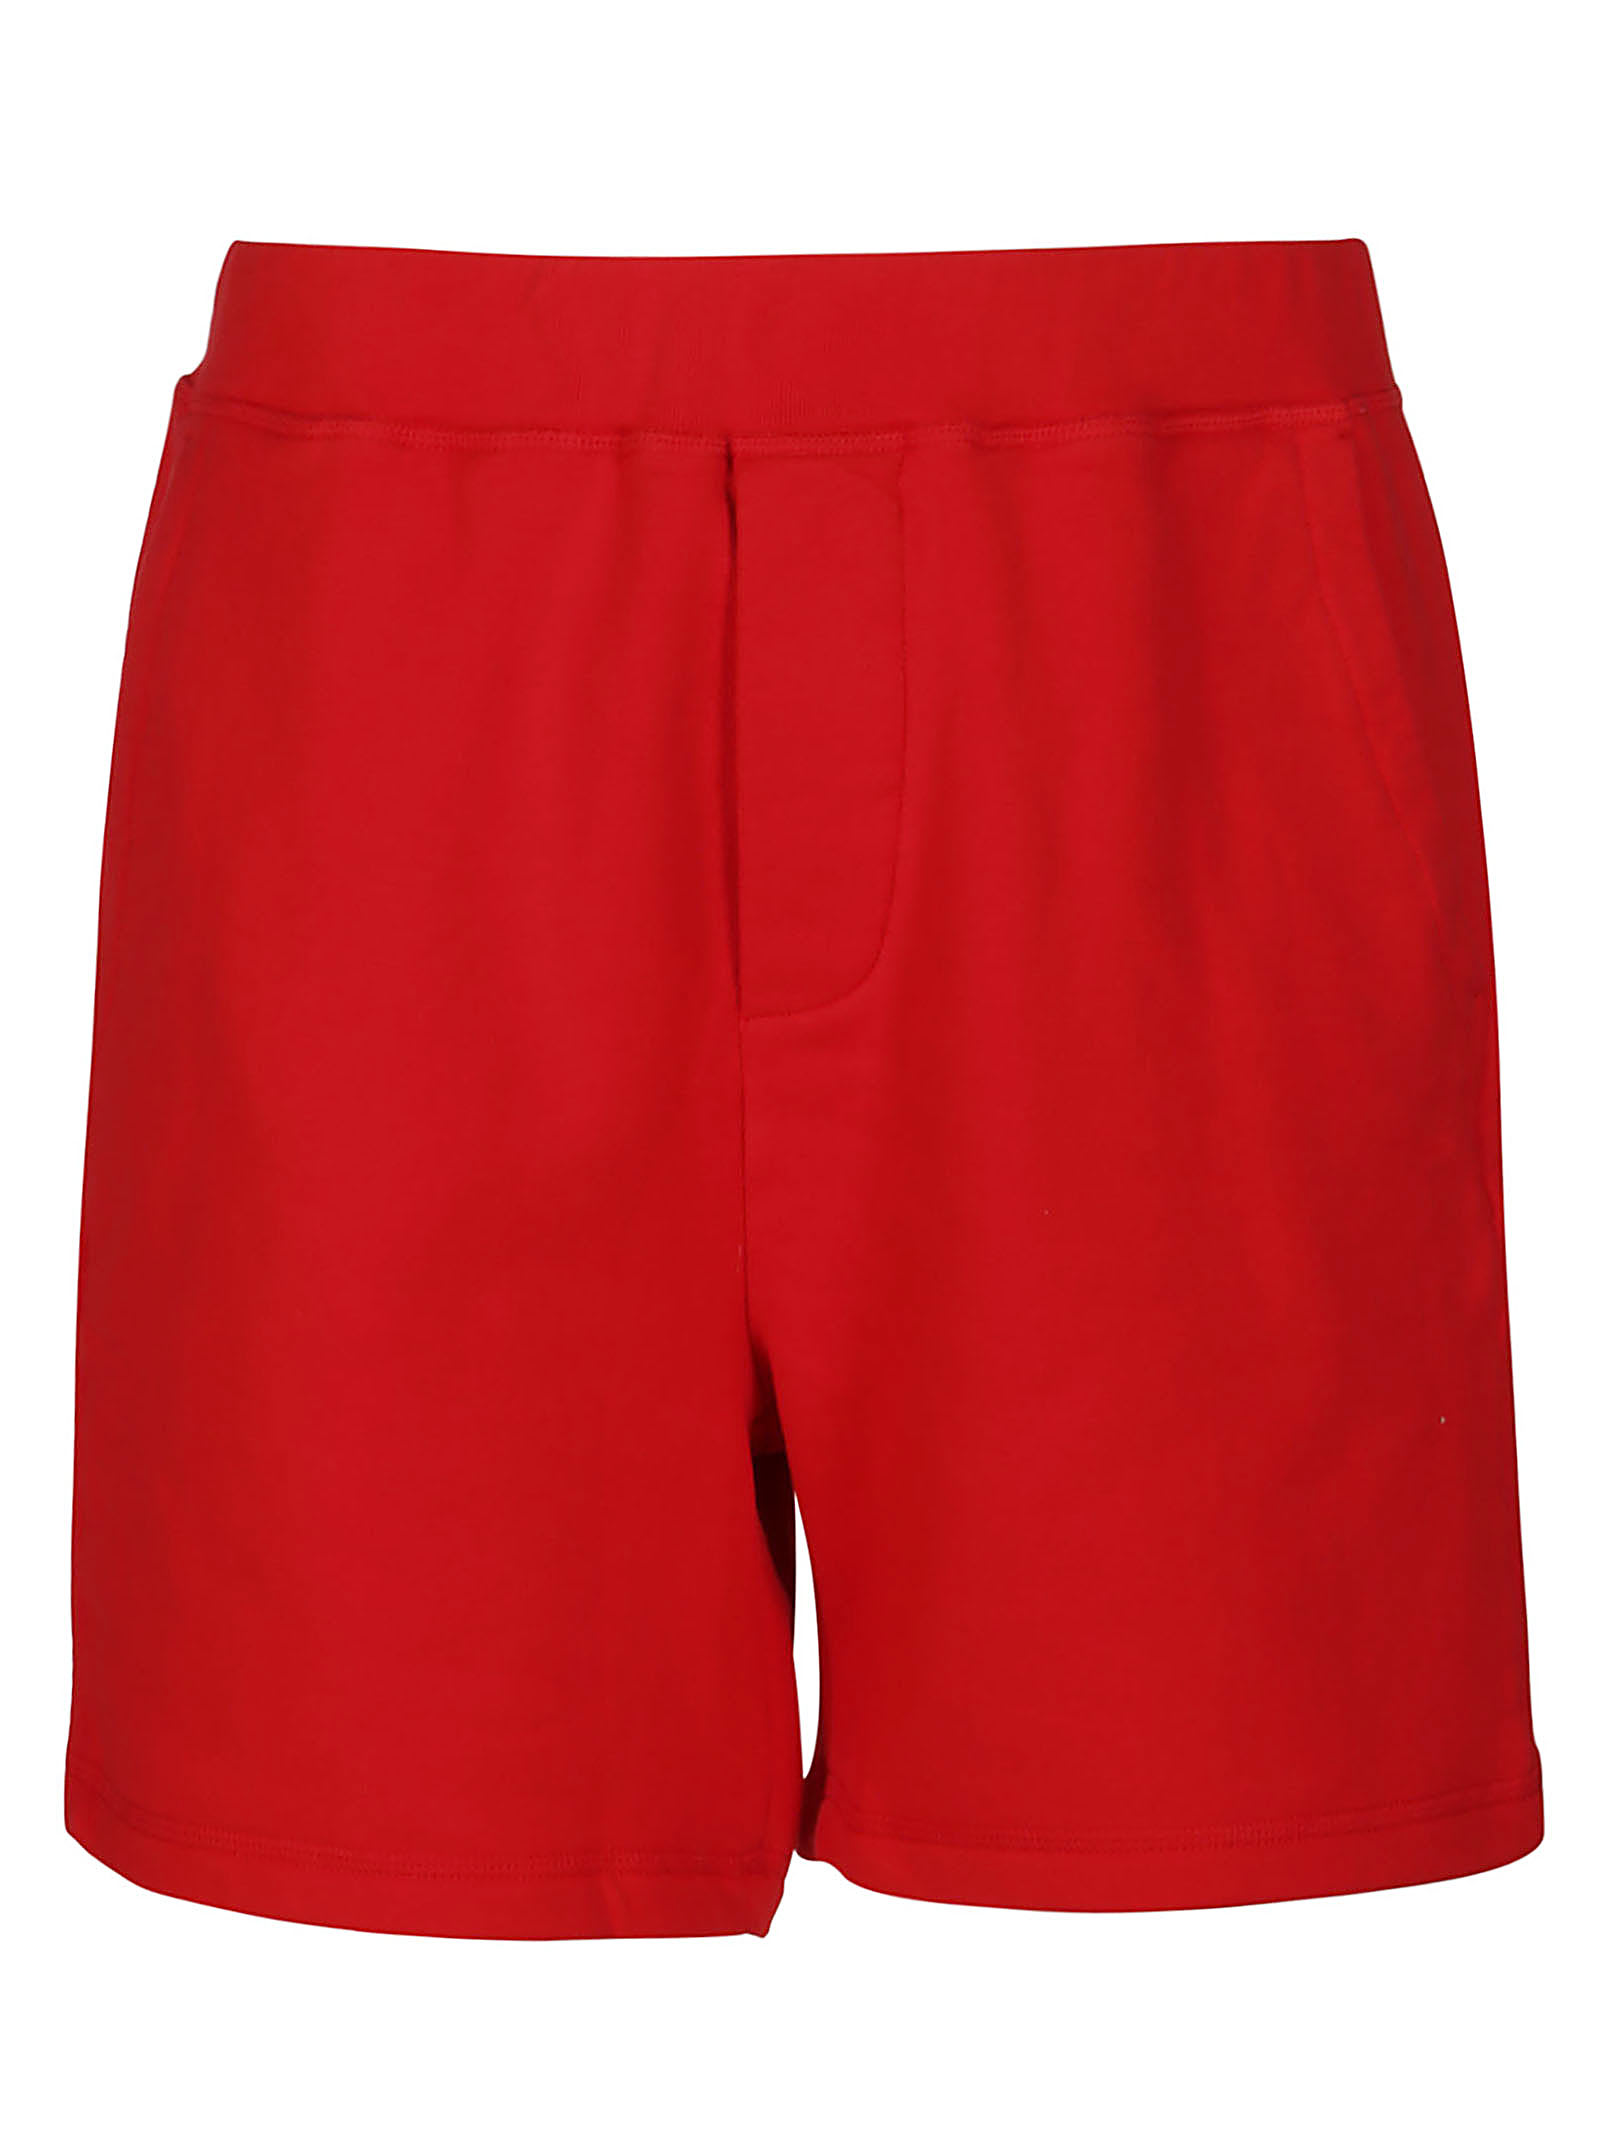 DSQUARED2 RED COTTON TRACK SHORTS,S79MU0018 S25042312